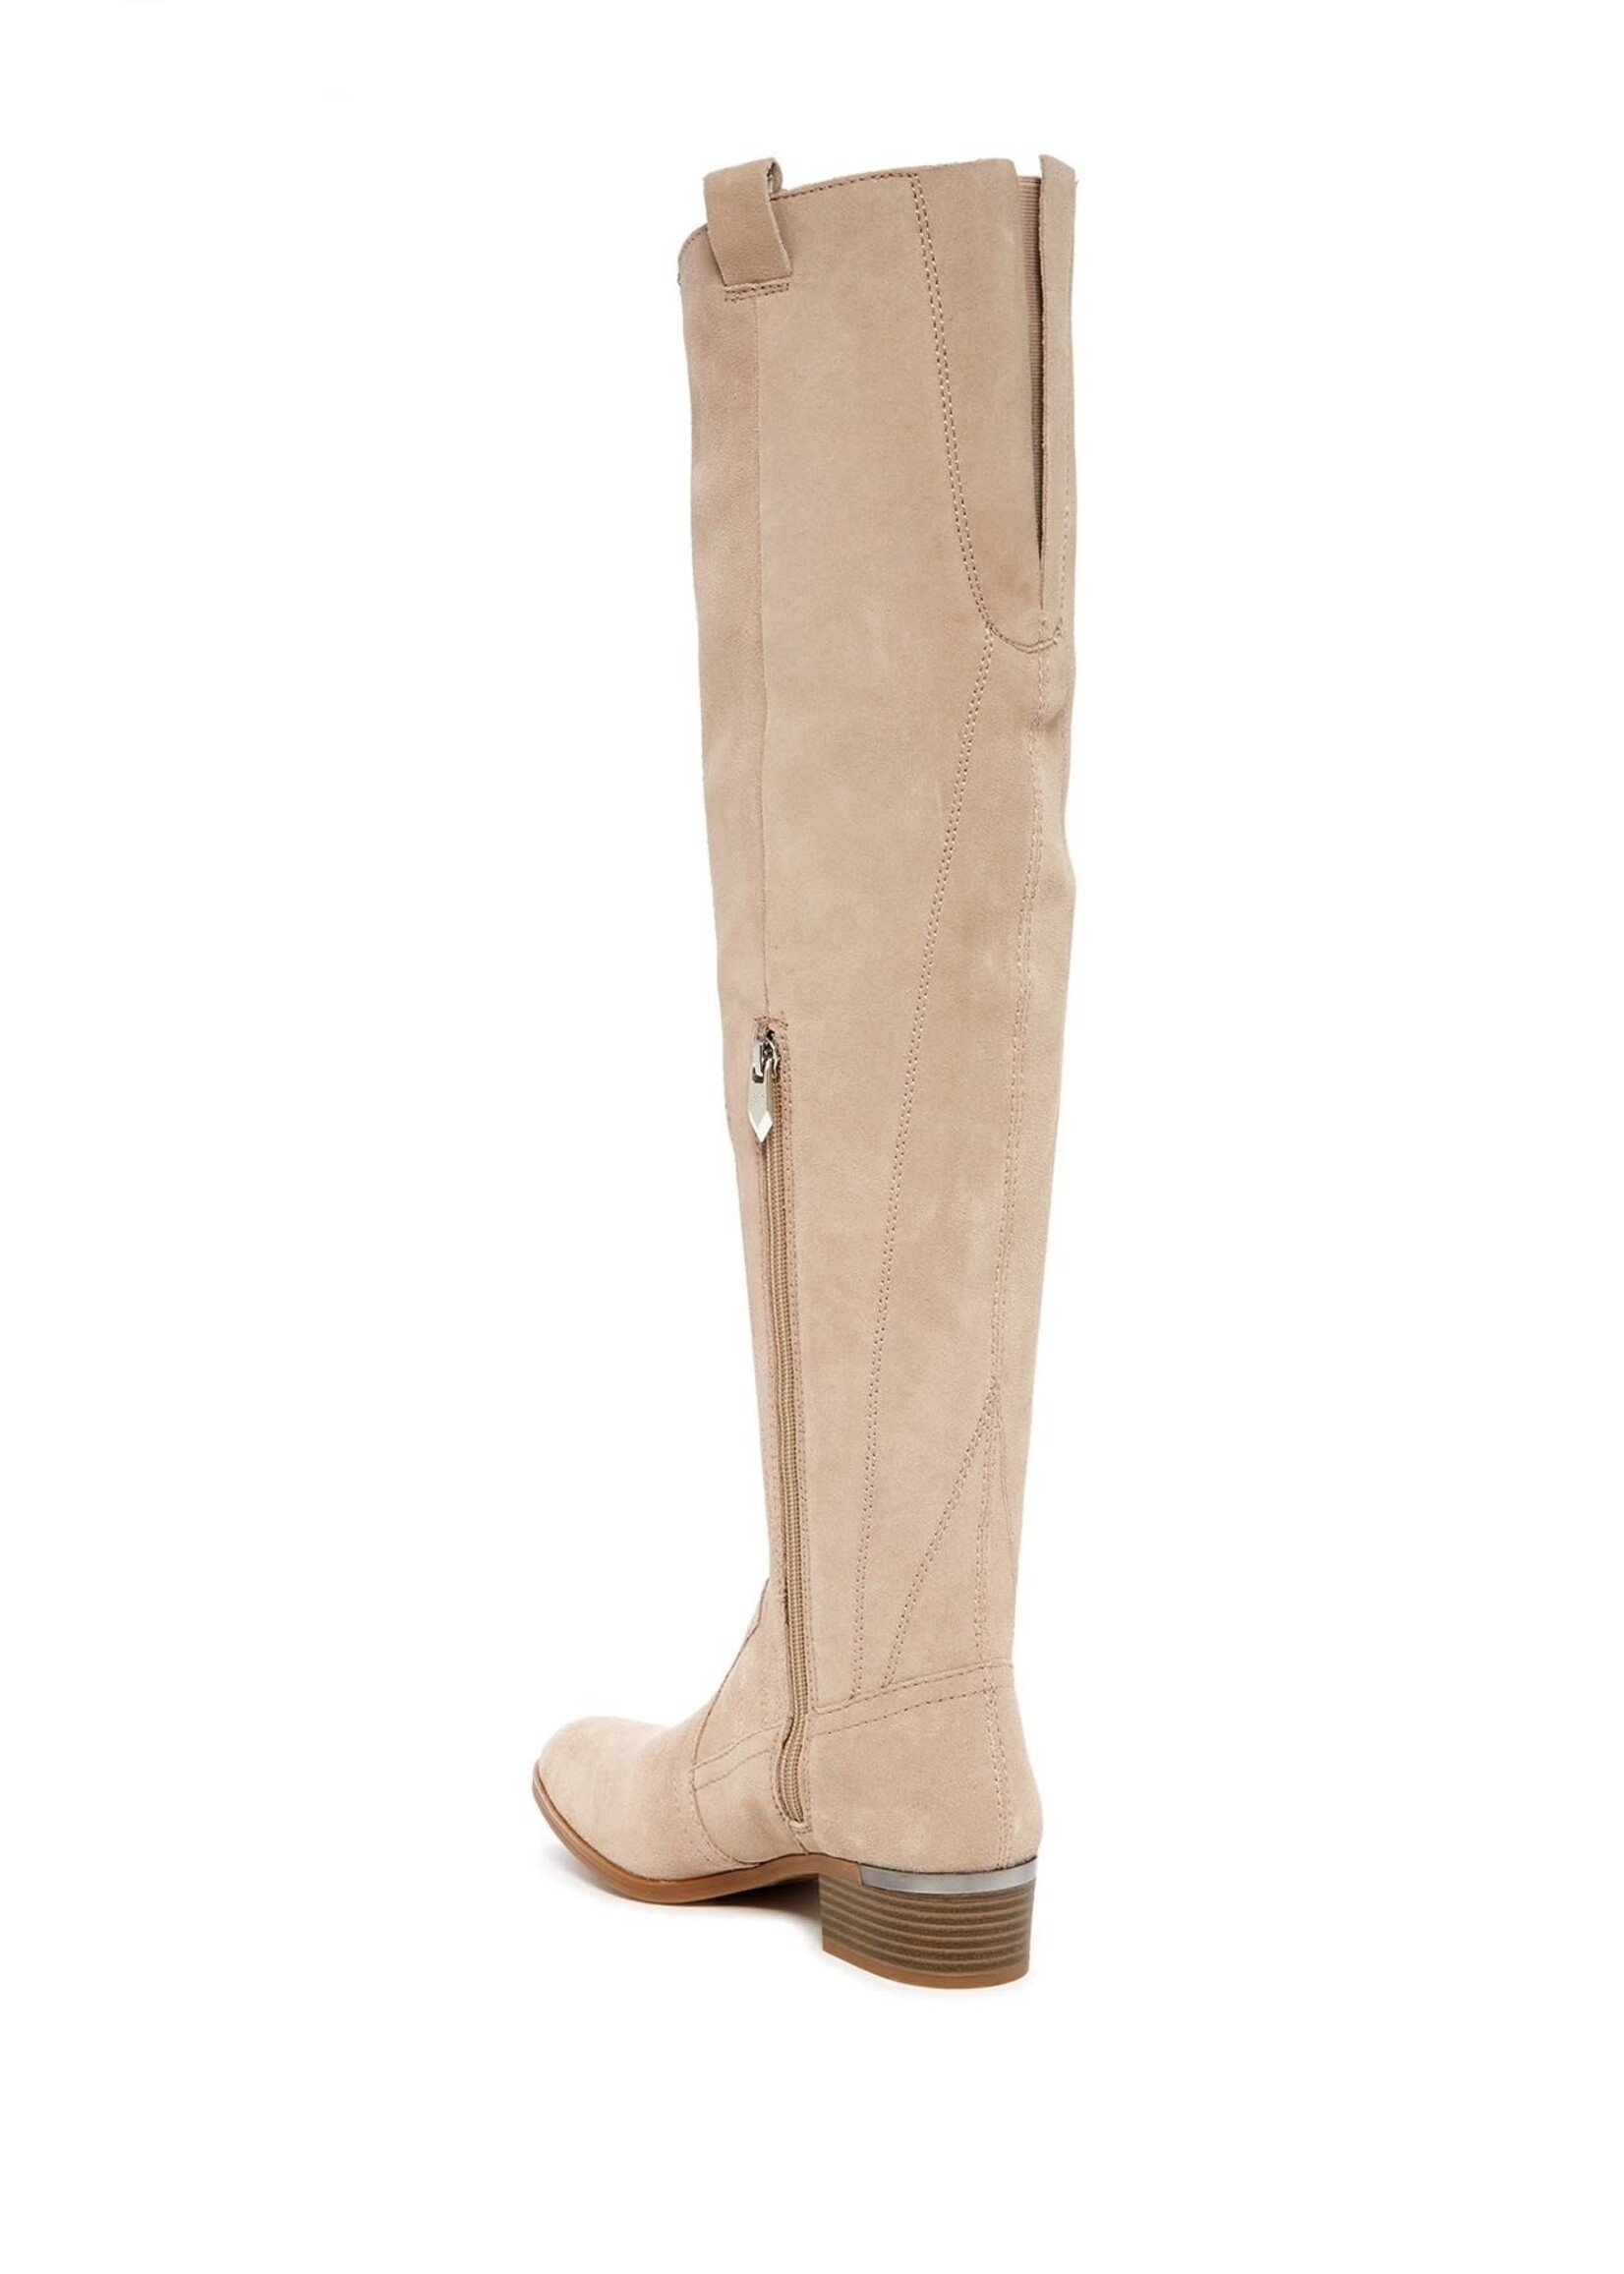 Fergie Footwear Women's Romance Over-The-Knee Boot,Portico Leather